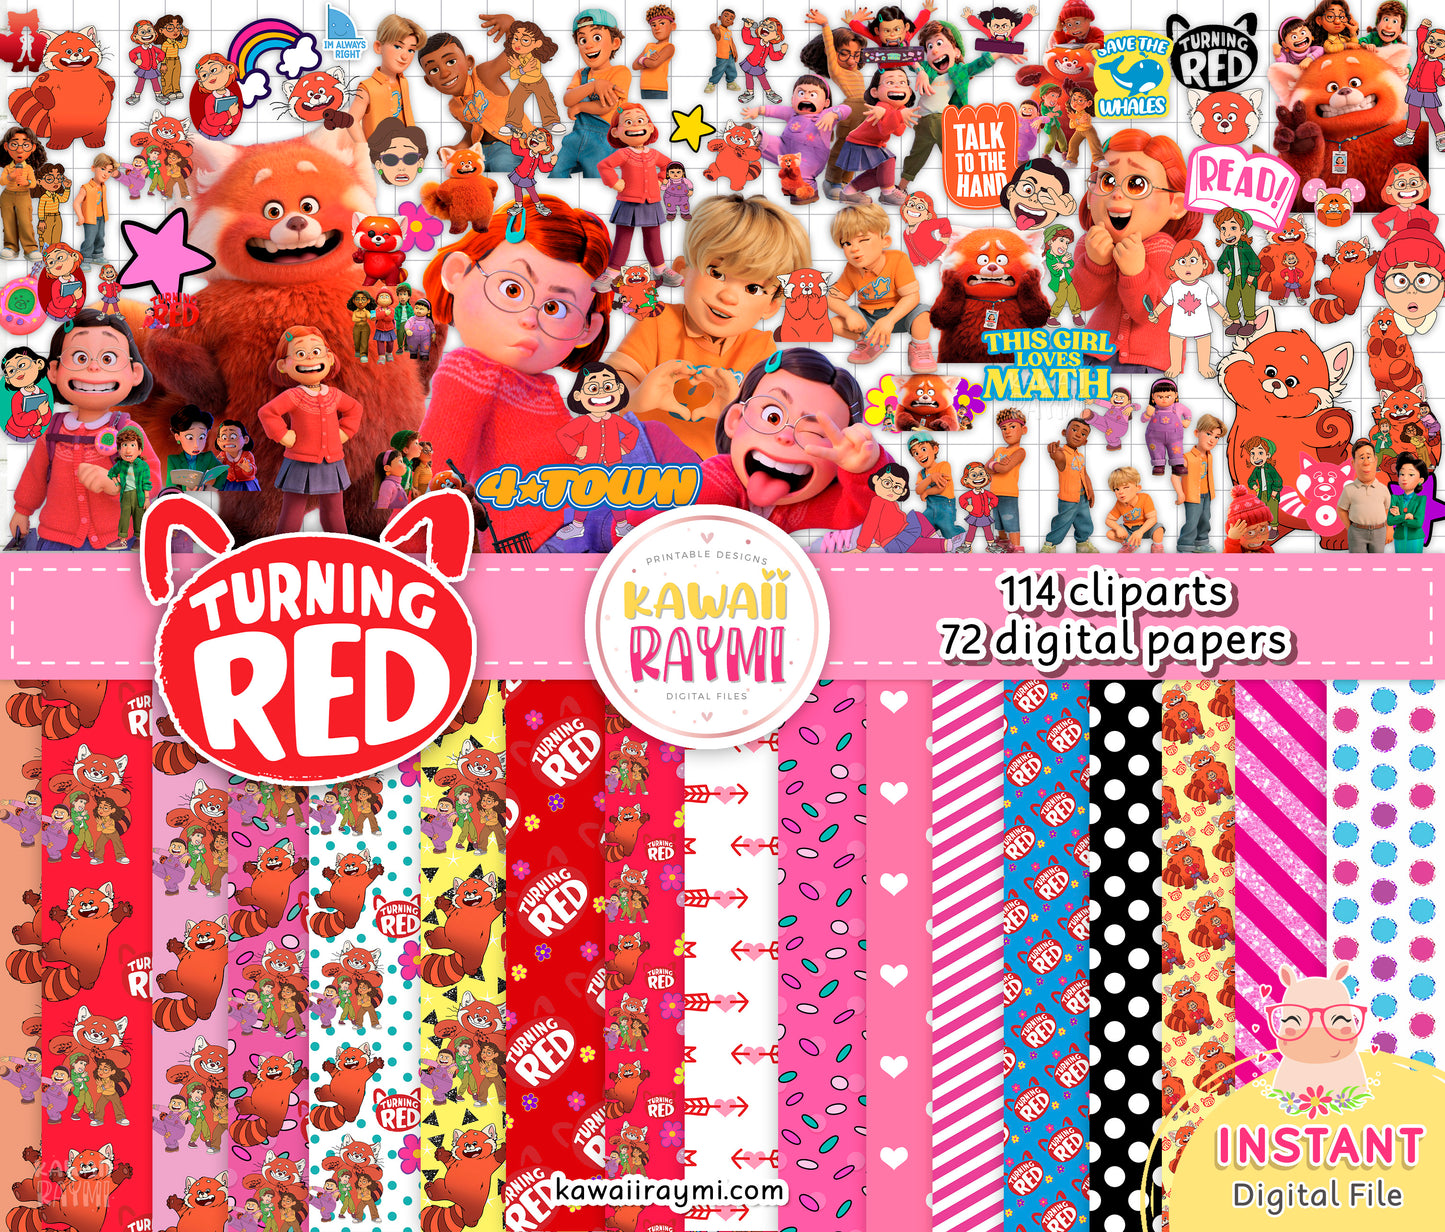 Turning red cliparts, turning red digital papers, red panda digital papers, red panda png cliparts, instant download